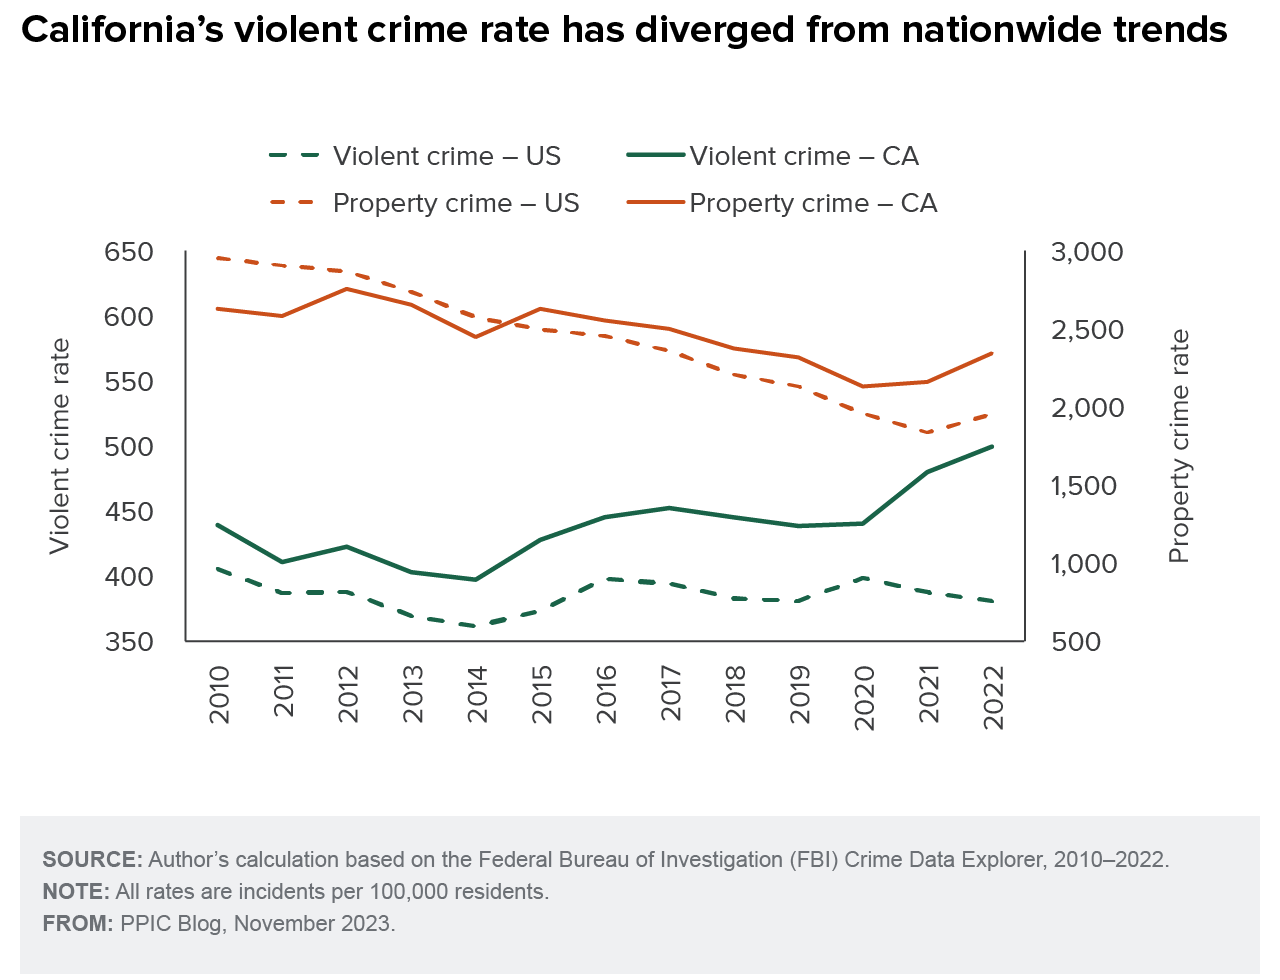 Californias Violent Crime Rate Is Diverging From The National Trend Figure 1 